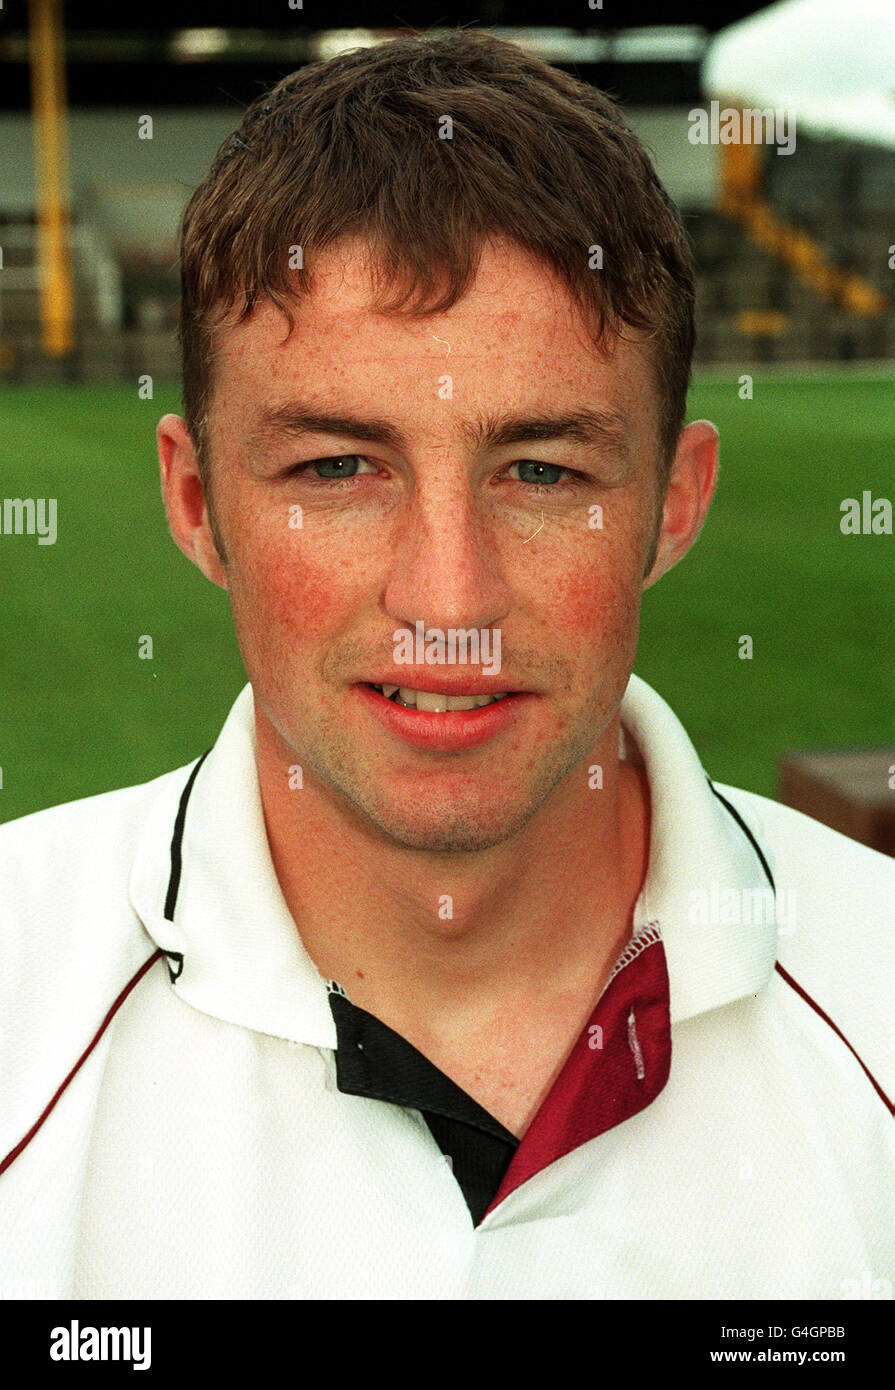 Swansea City/Damien Lacey. Damien Lacey of Swansea City football club. Stock Photo